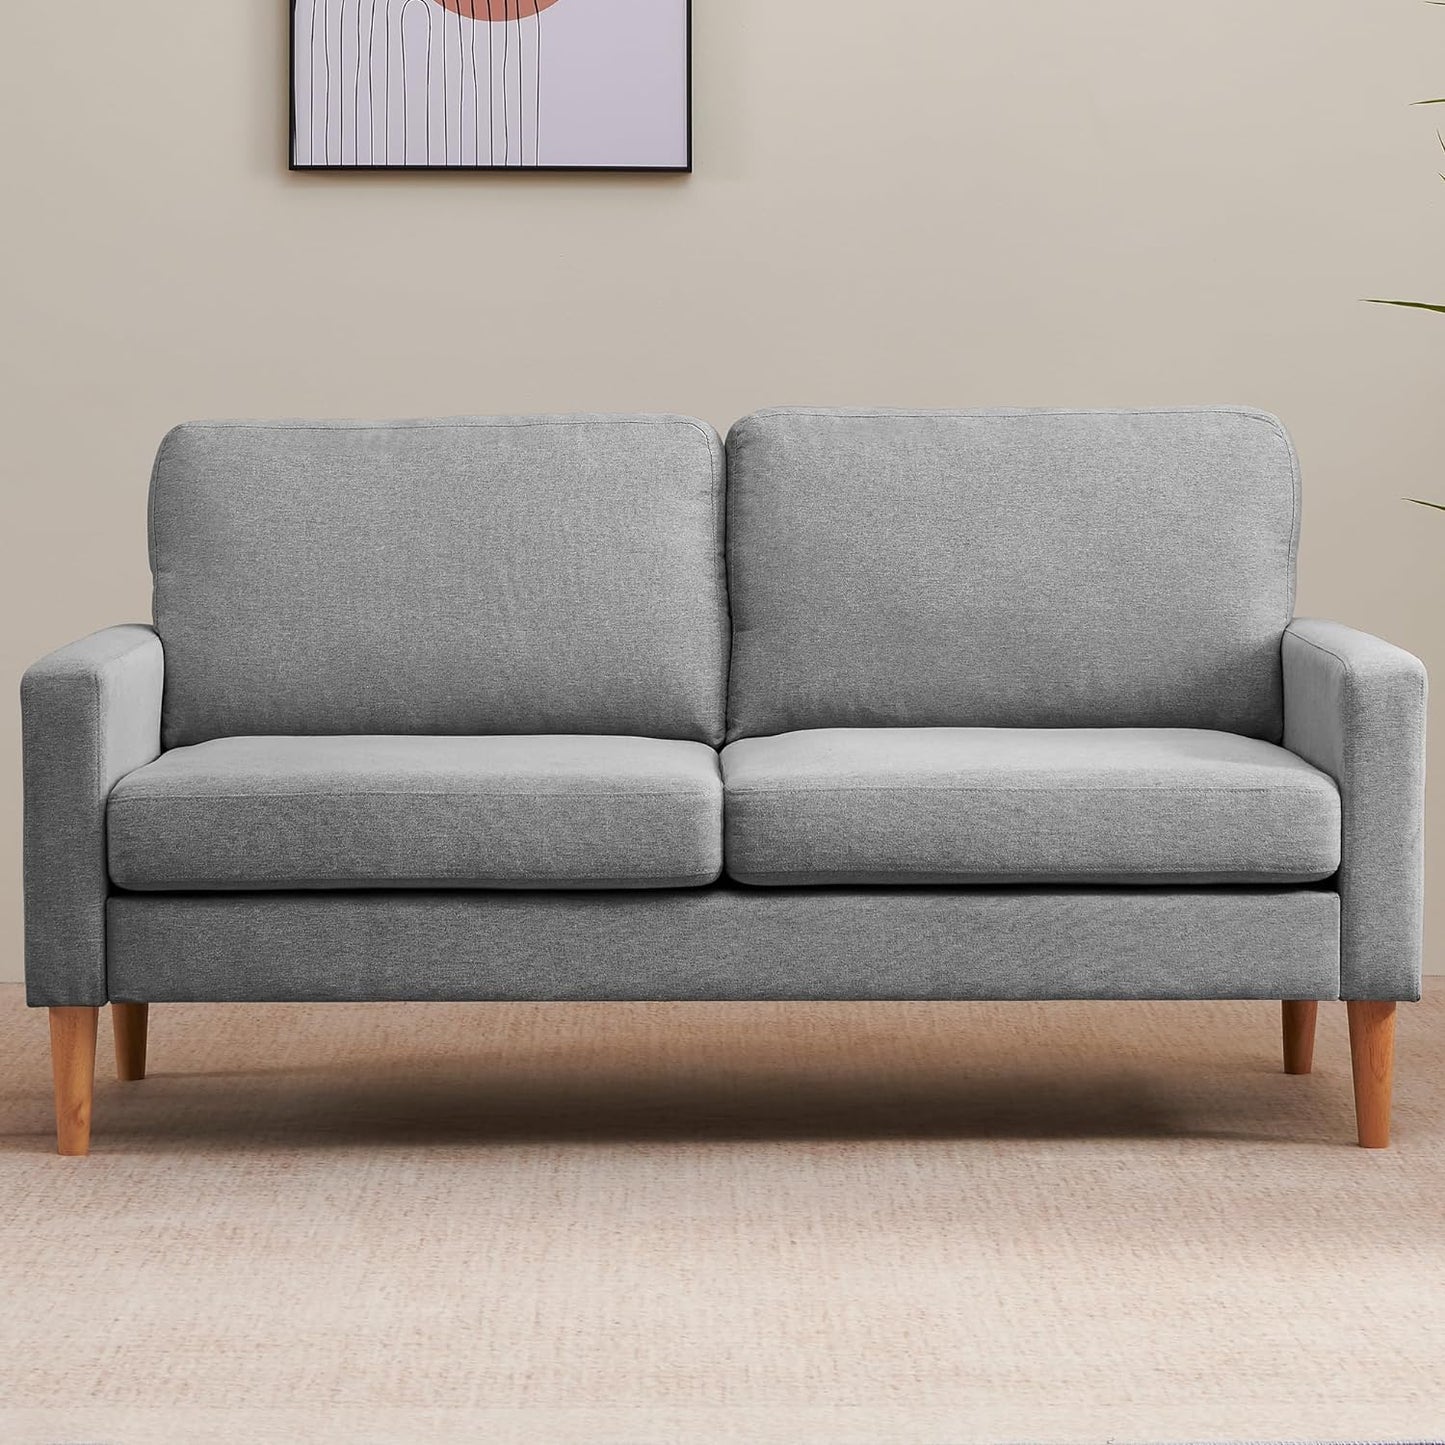 Couch for Small Spaces, 65 Inch Loveseat Sofa 2 Seat Couches for Bedroom, Spring Upholstered Small Sofa Couch with Solid Wood Frame, Tool Free Installation